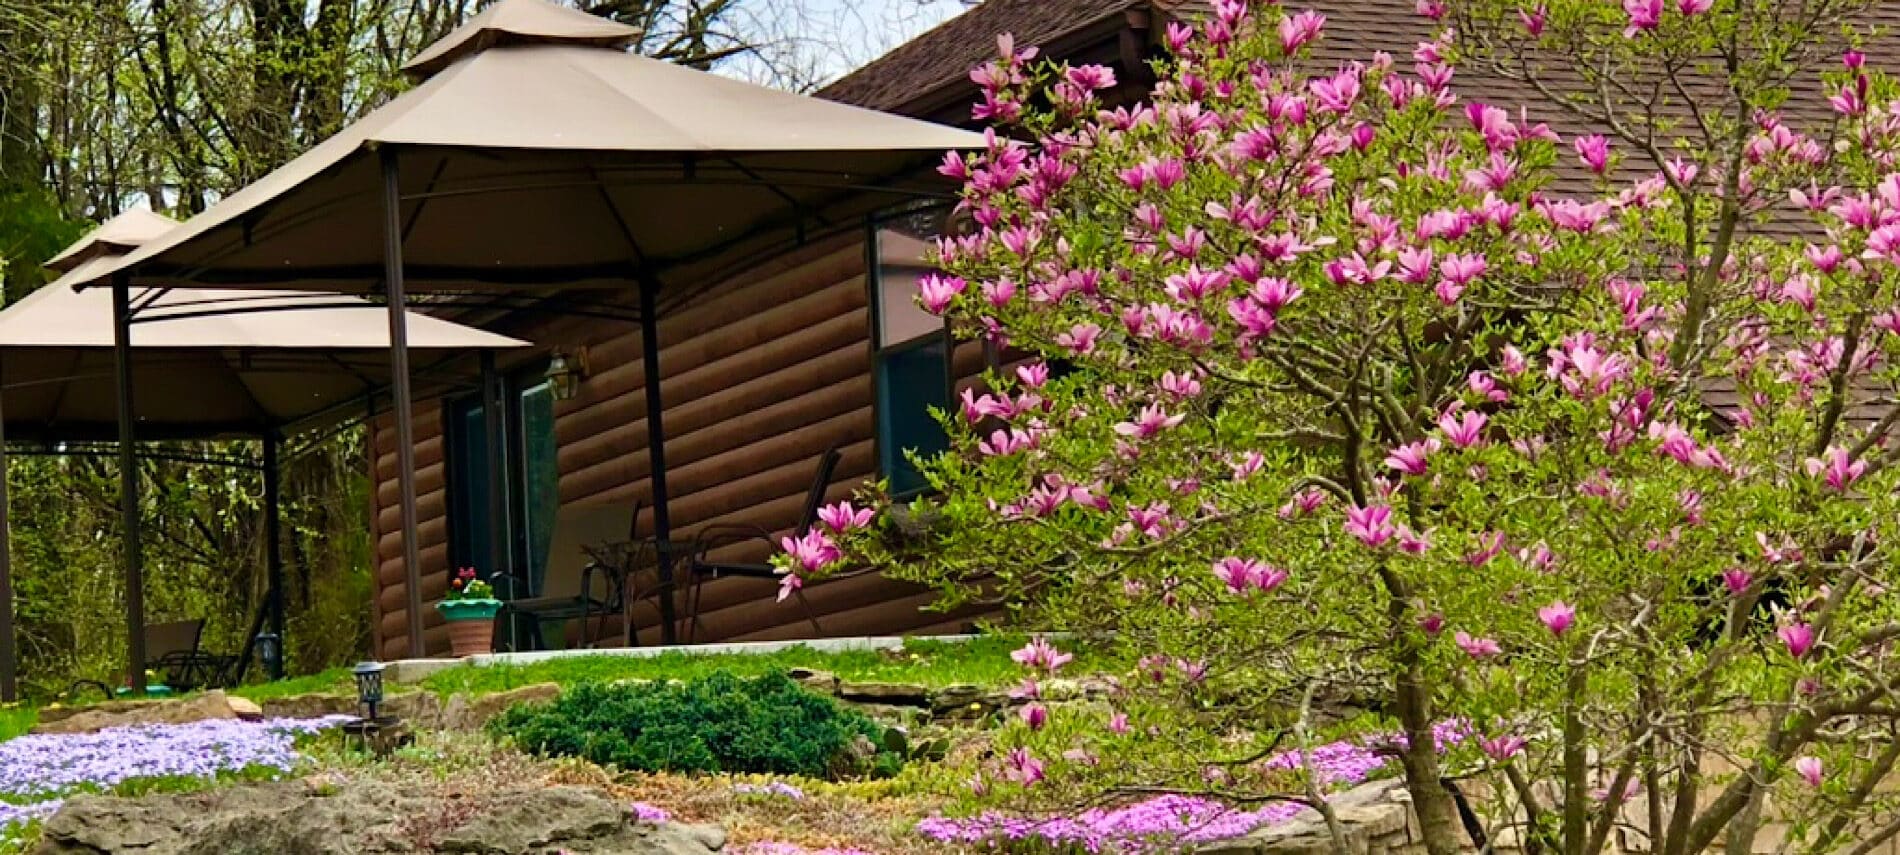 Magnolia Tree with log home and two gazebos in background